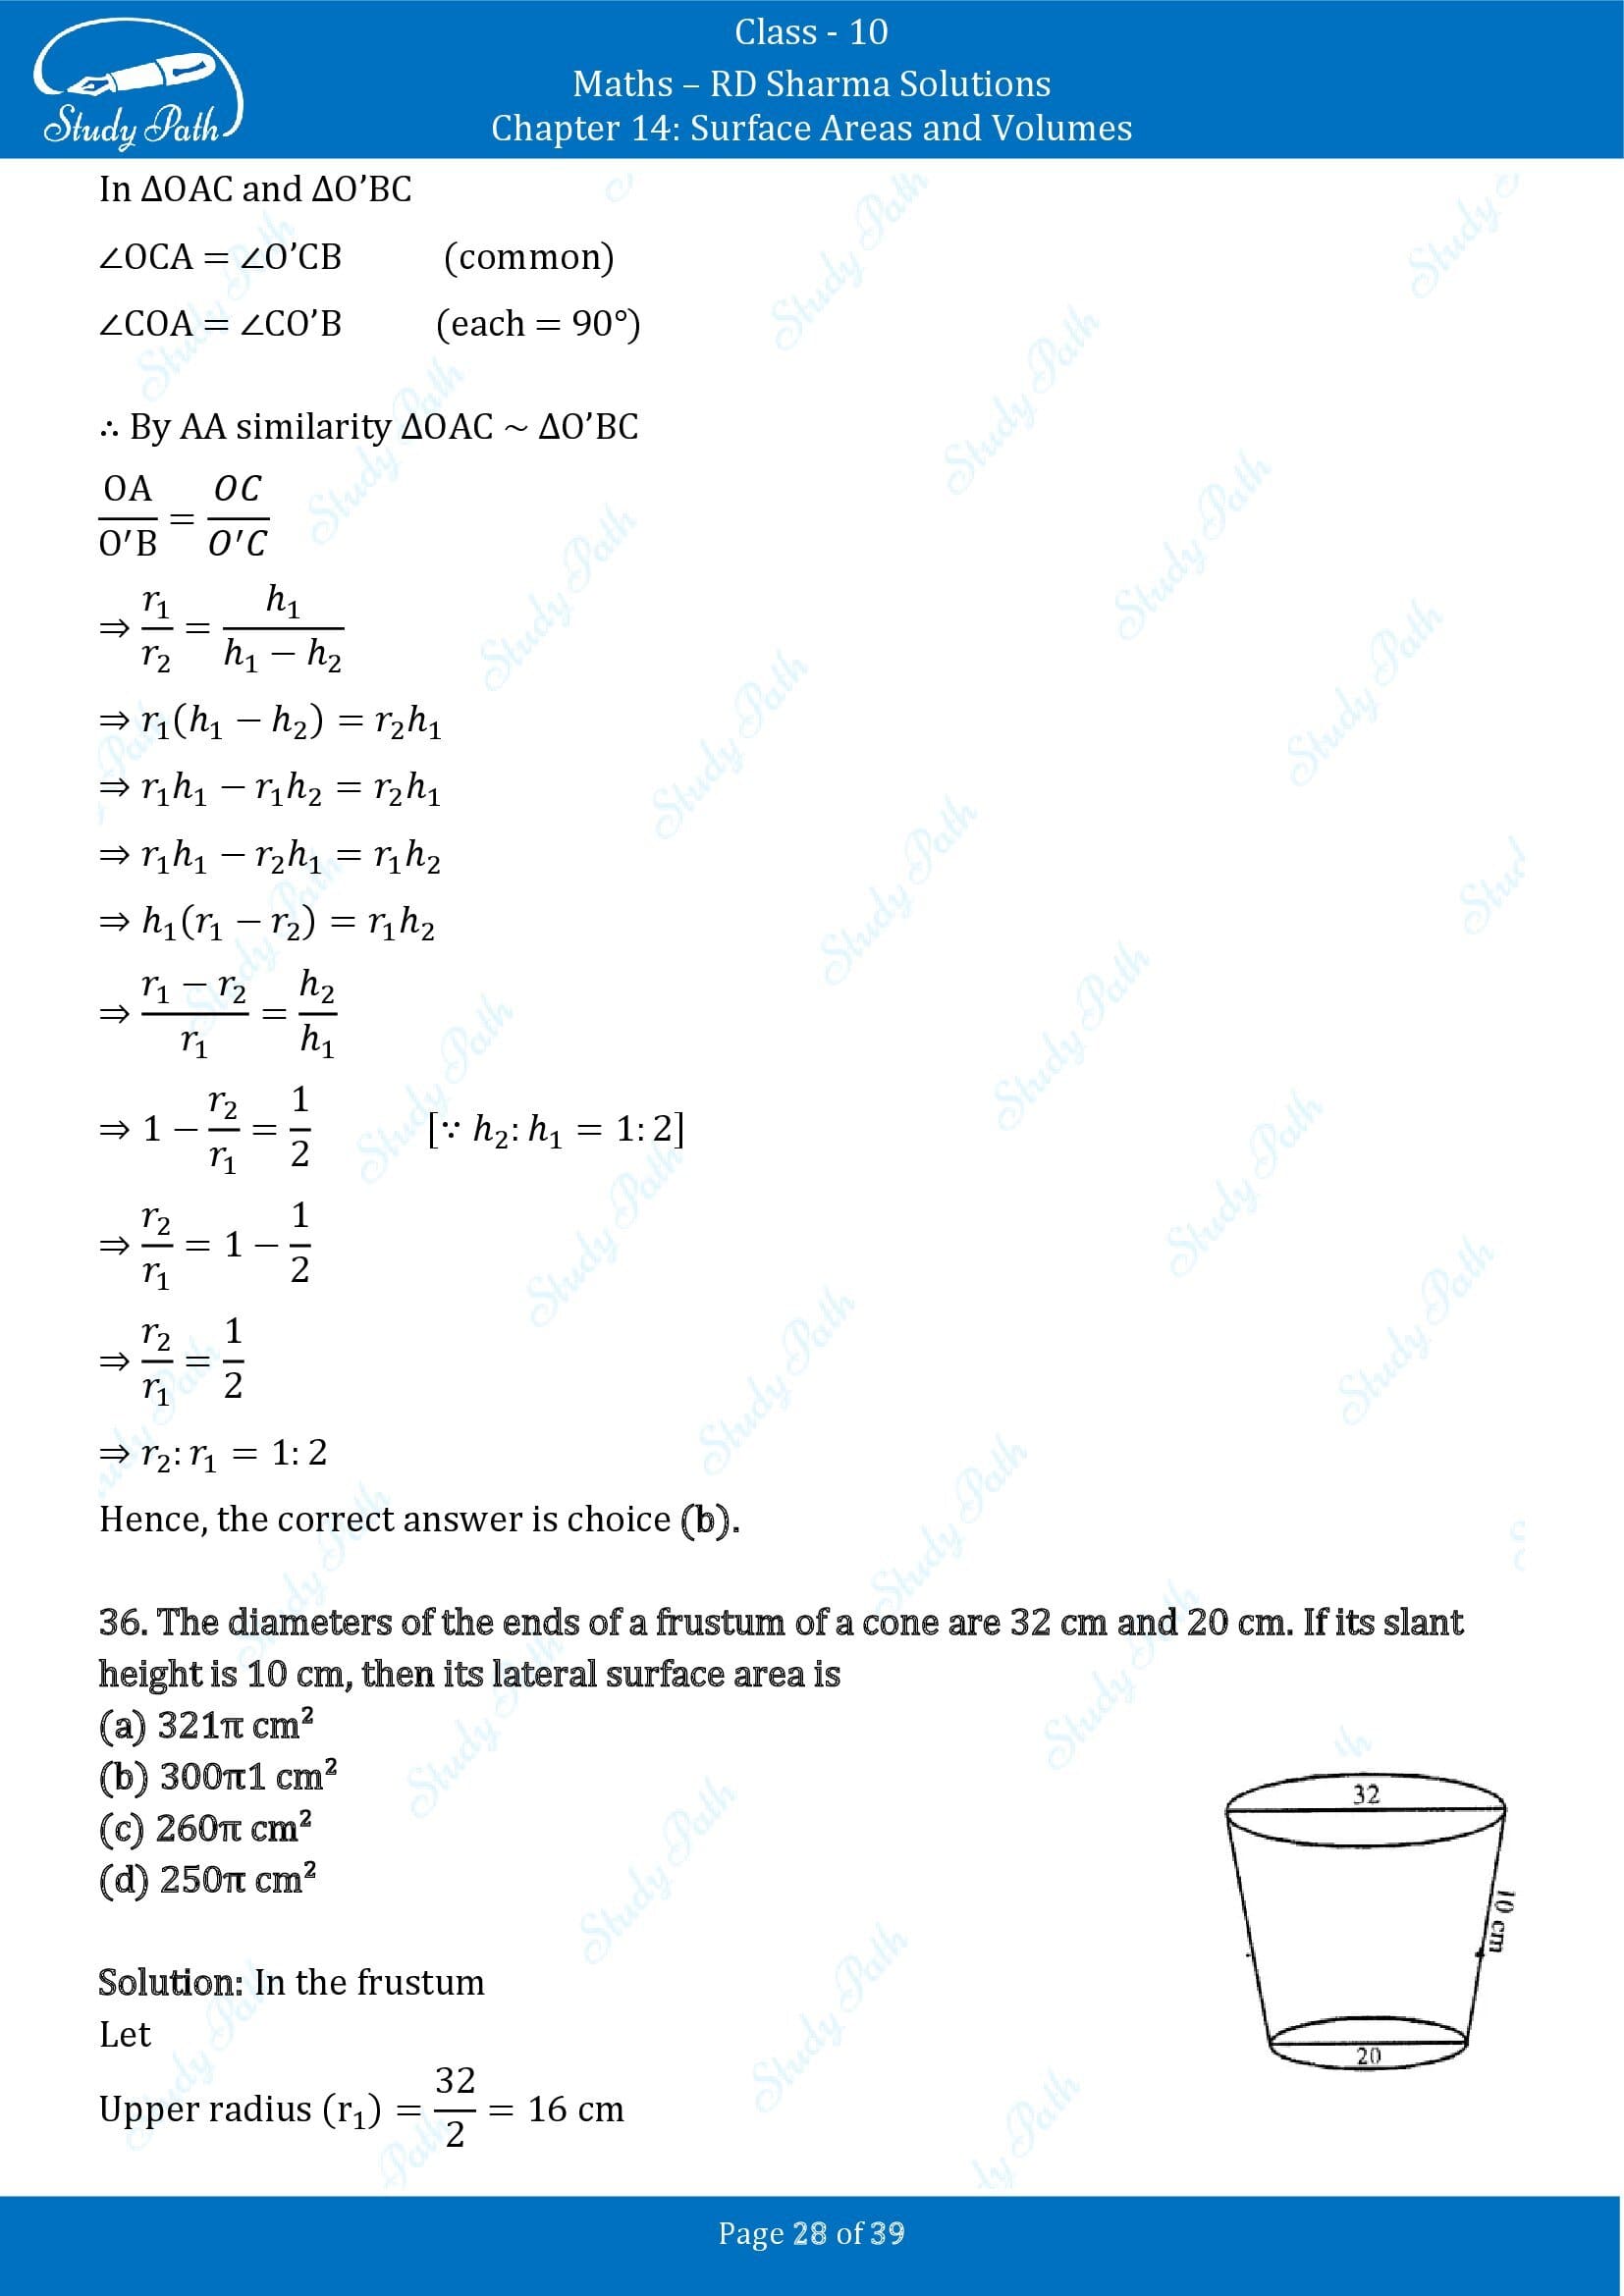 RD Sharma Solutions Class 10 Chapter 14 Surface Areas and Volumes Multiple Choice Question MCQs 00028